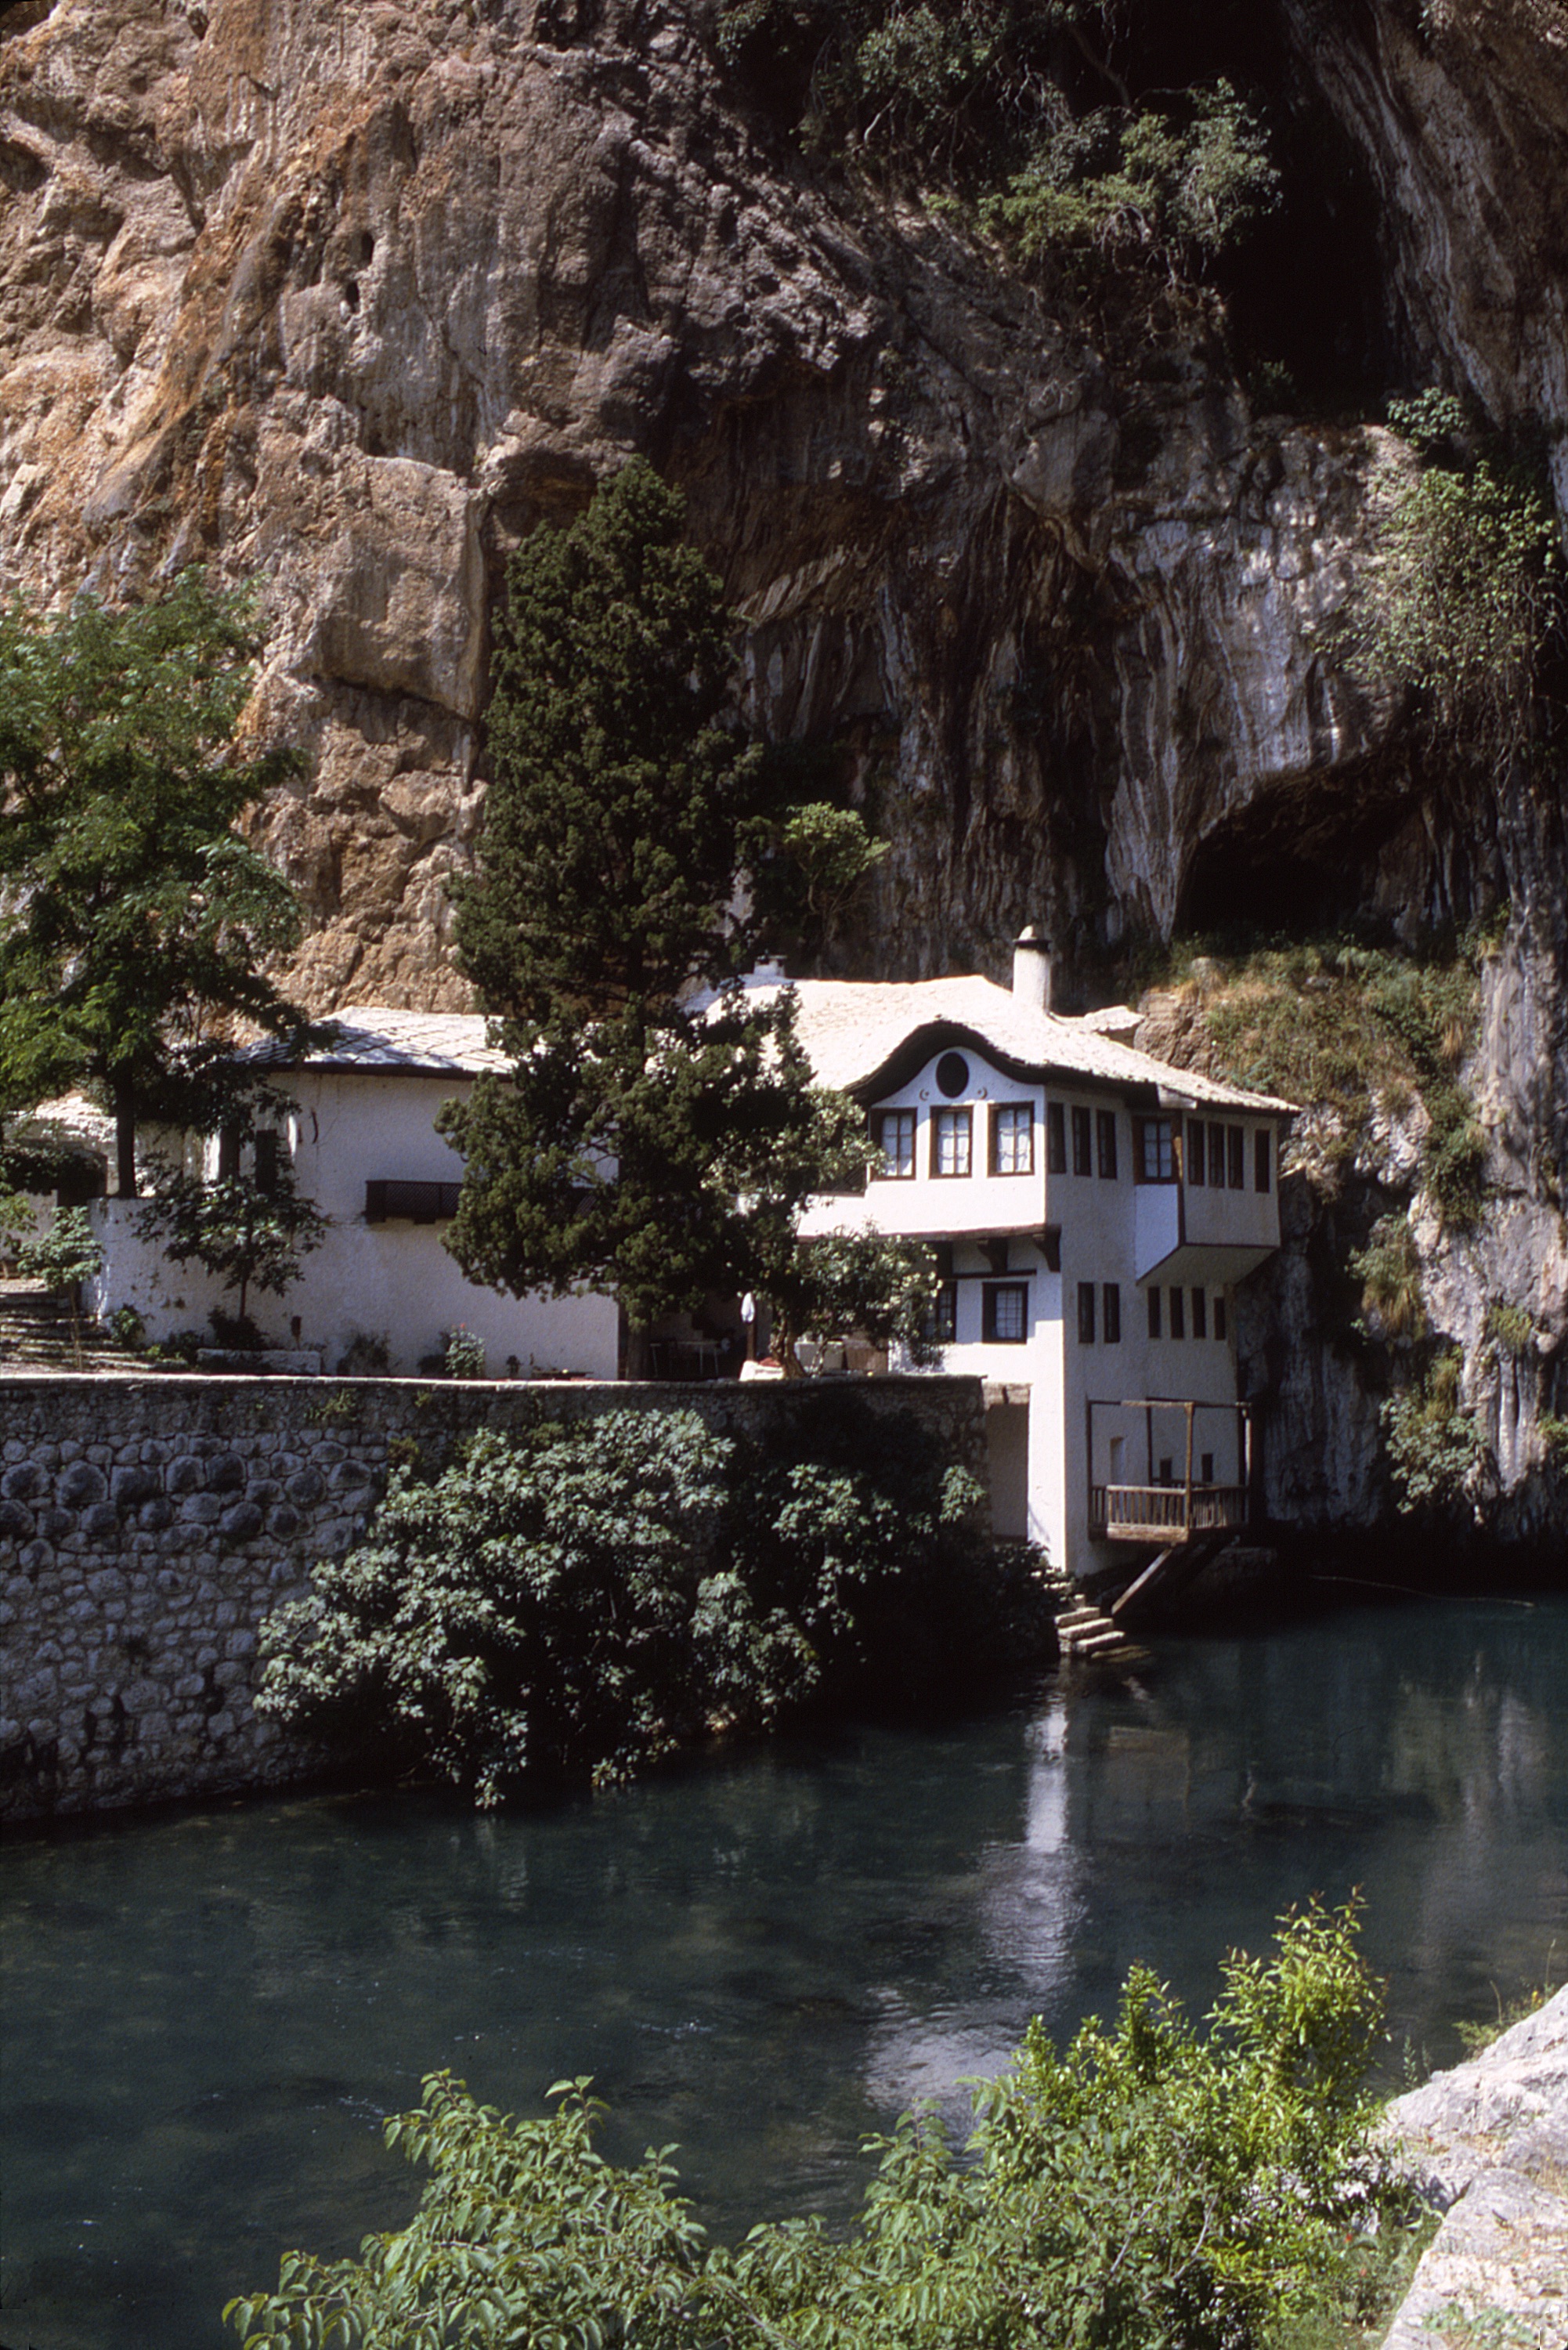 <p>The village of Blagaj na Buni is located southeast of Mostar in the Neretva Canton of Herzegovina. The Buna River emerges from under the massive karst stone formation after traveling over 19 kilometers underground. Archaeological finds indicate that the area has been inhabited for over 5,000 years. The present tekija (dervish monastic complex) dates back over 300 years. The karst formation extends high above the tekija to sites where ruins of fortresses occupied by Illyrians, Romans, and medieval rulers are located.</p><p>(photo 1988)</p>